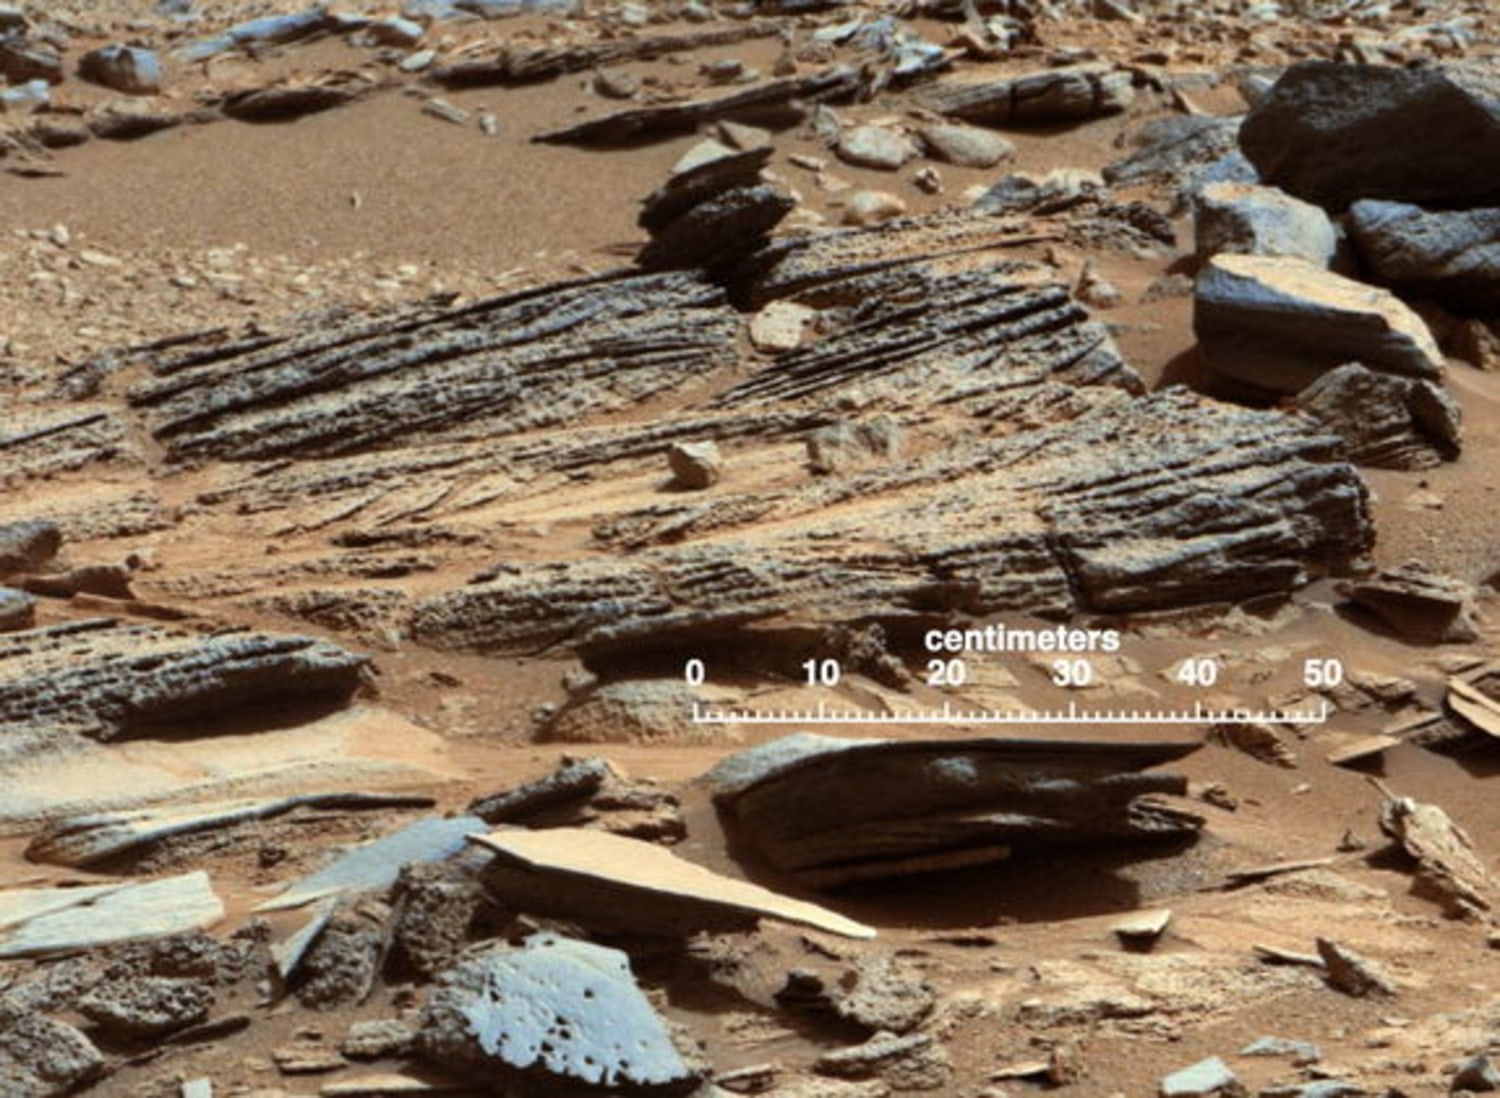 Mud Cracks on Mars Hint at Conditions That Could Have Formed Life Long Ago, Smart News